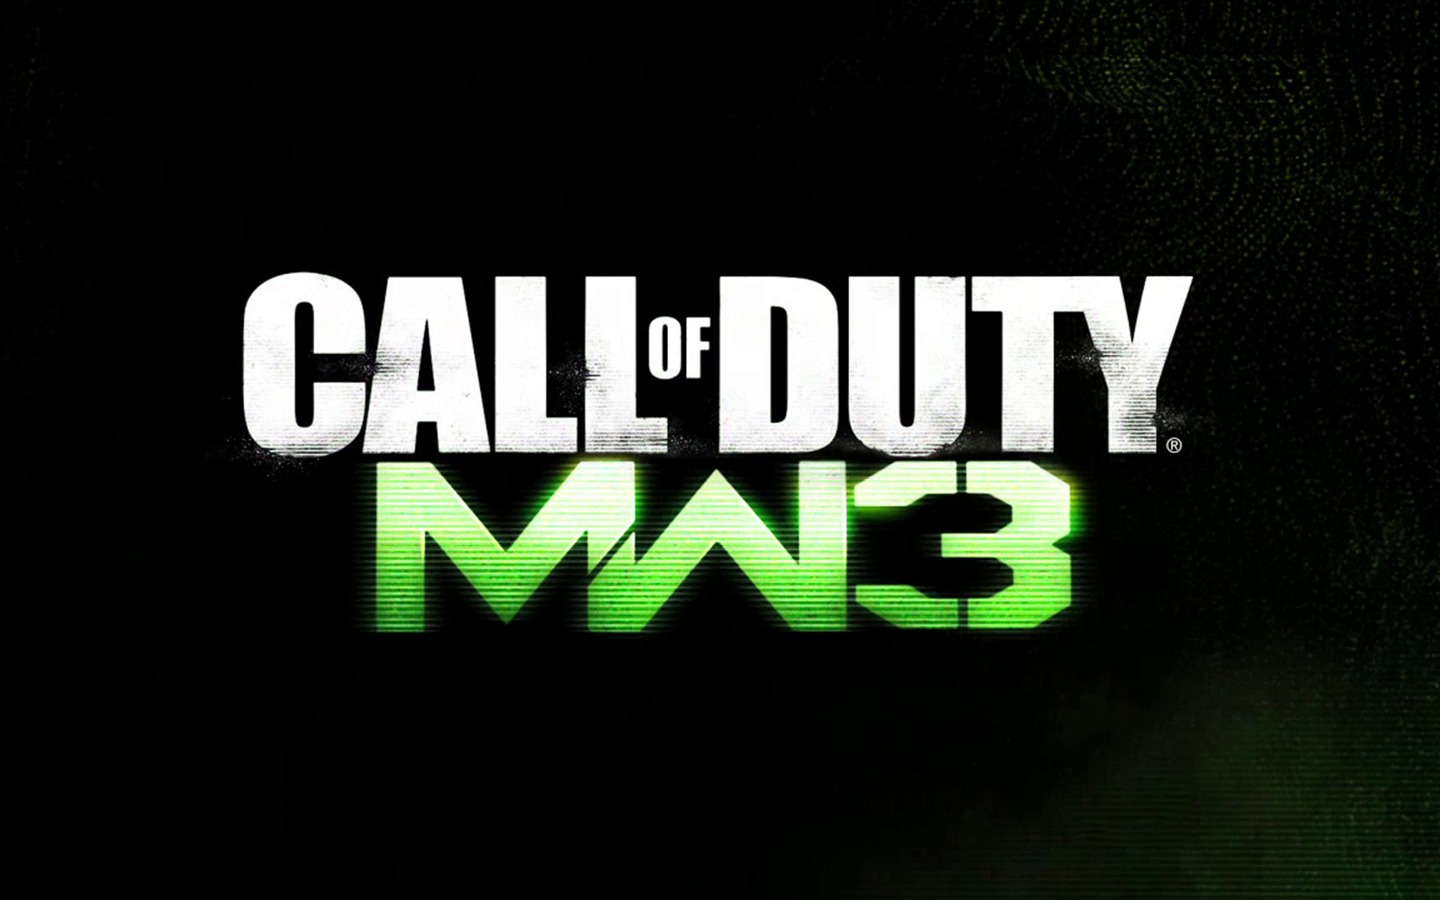 Call of Duty: MW3 HD wallpapers #9 - 1440x900